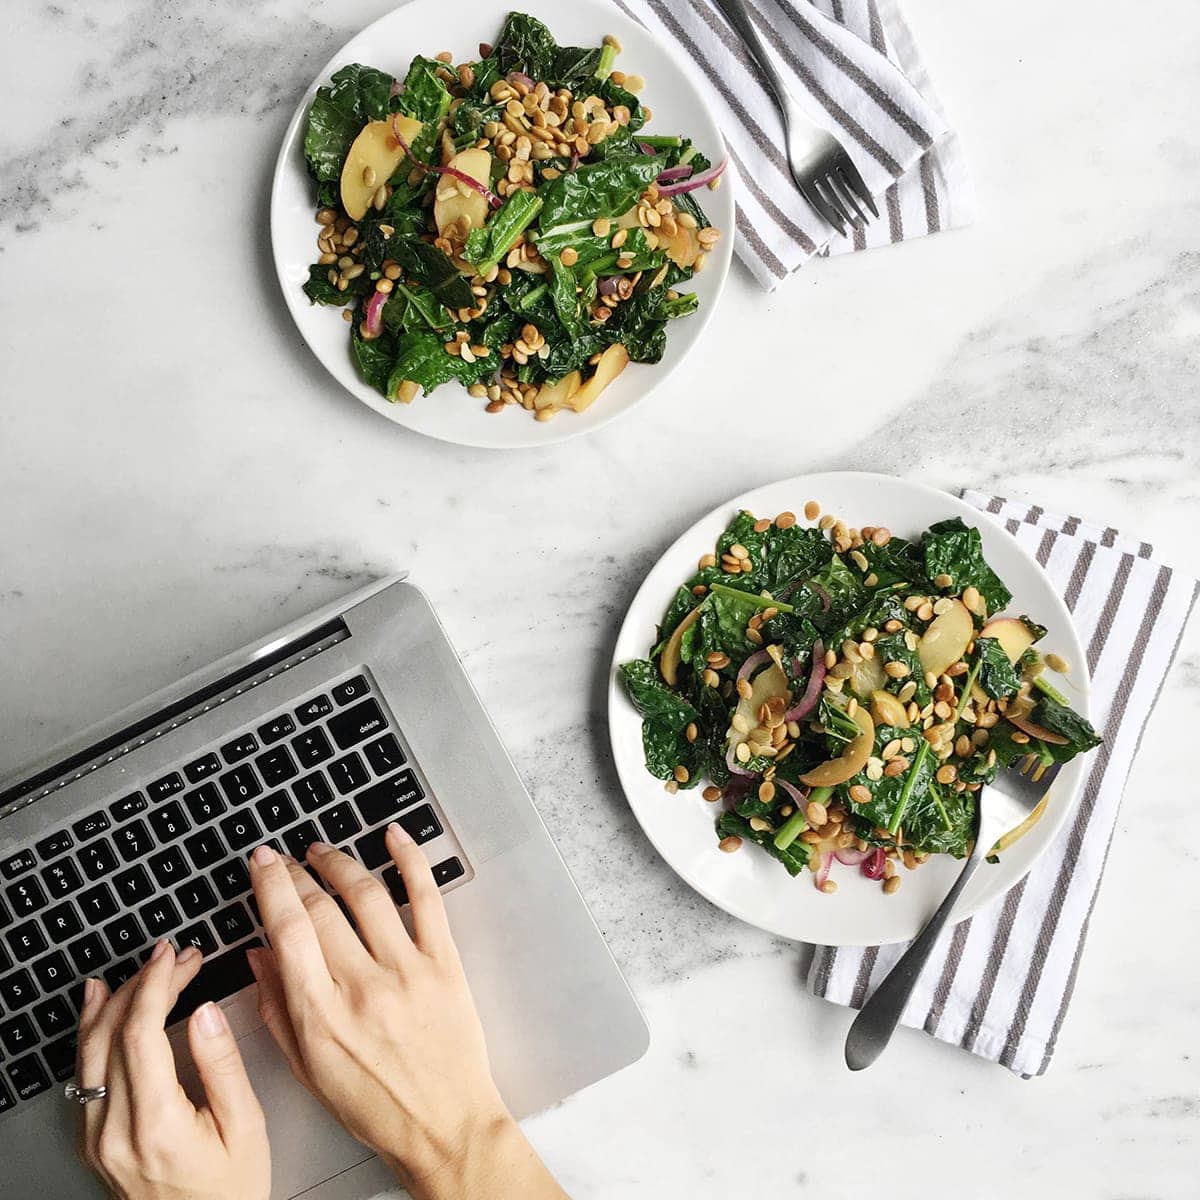 Best Food Blogs for Meal Planning